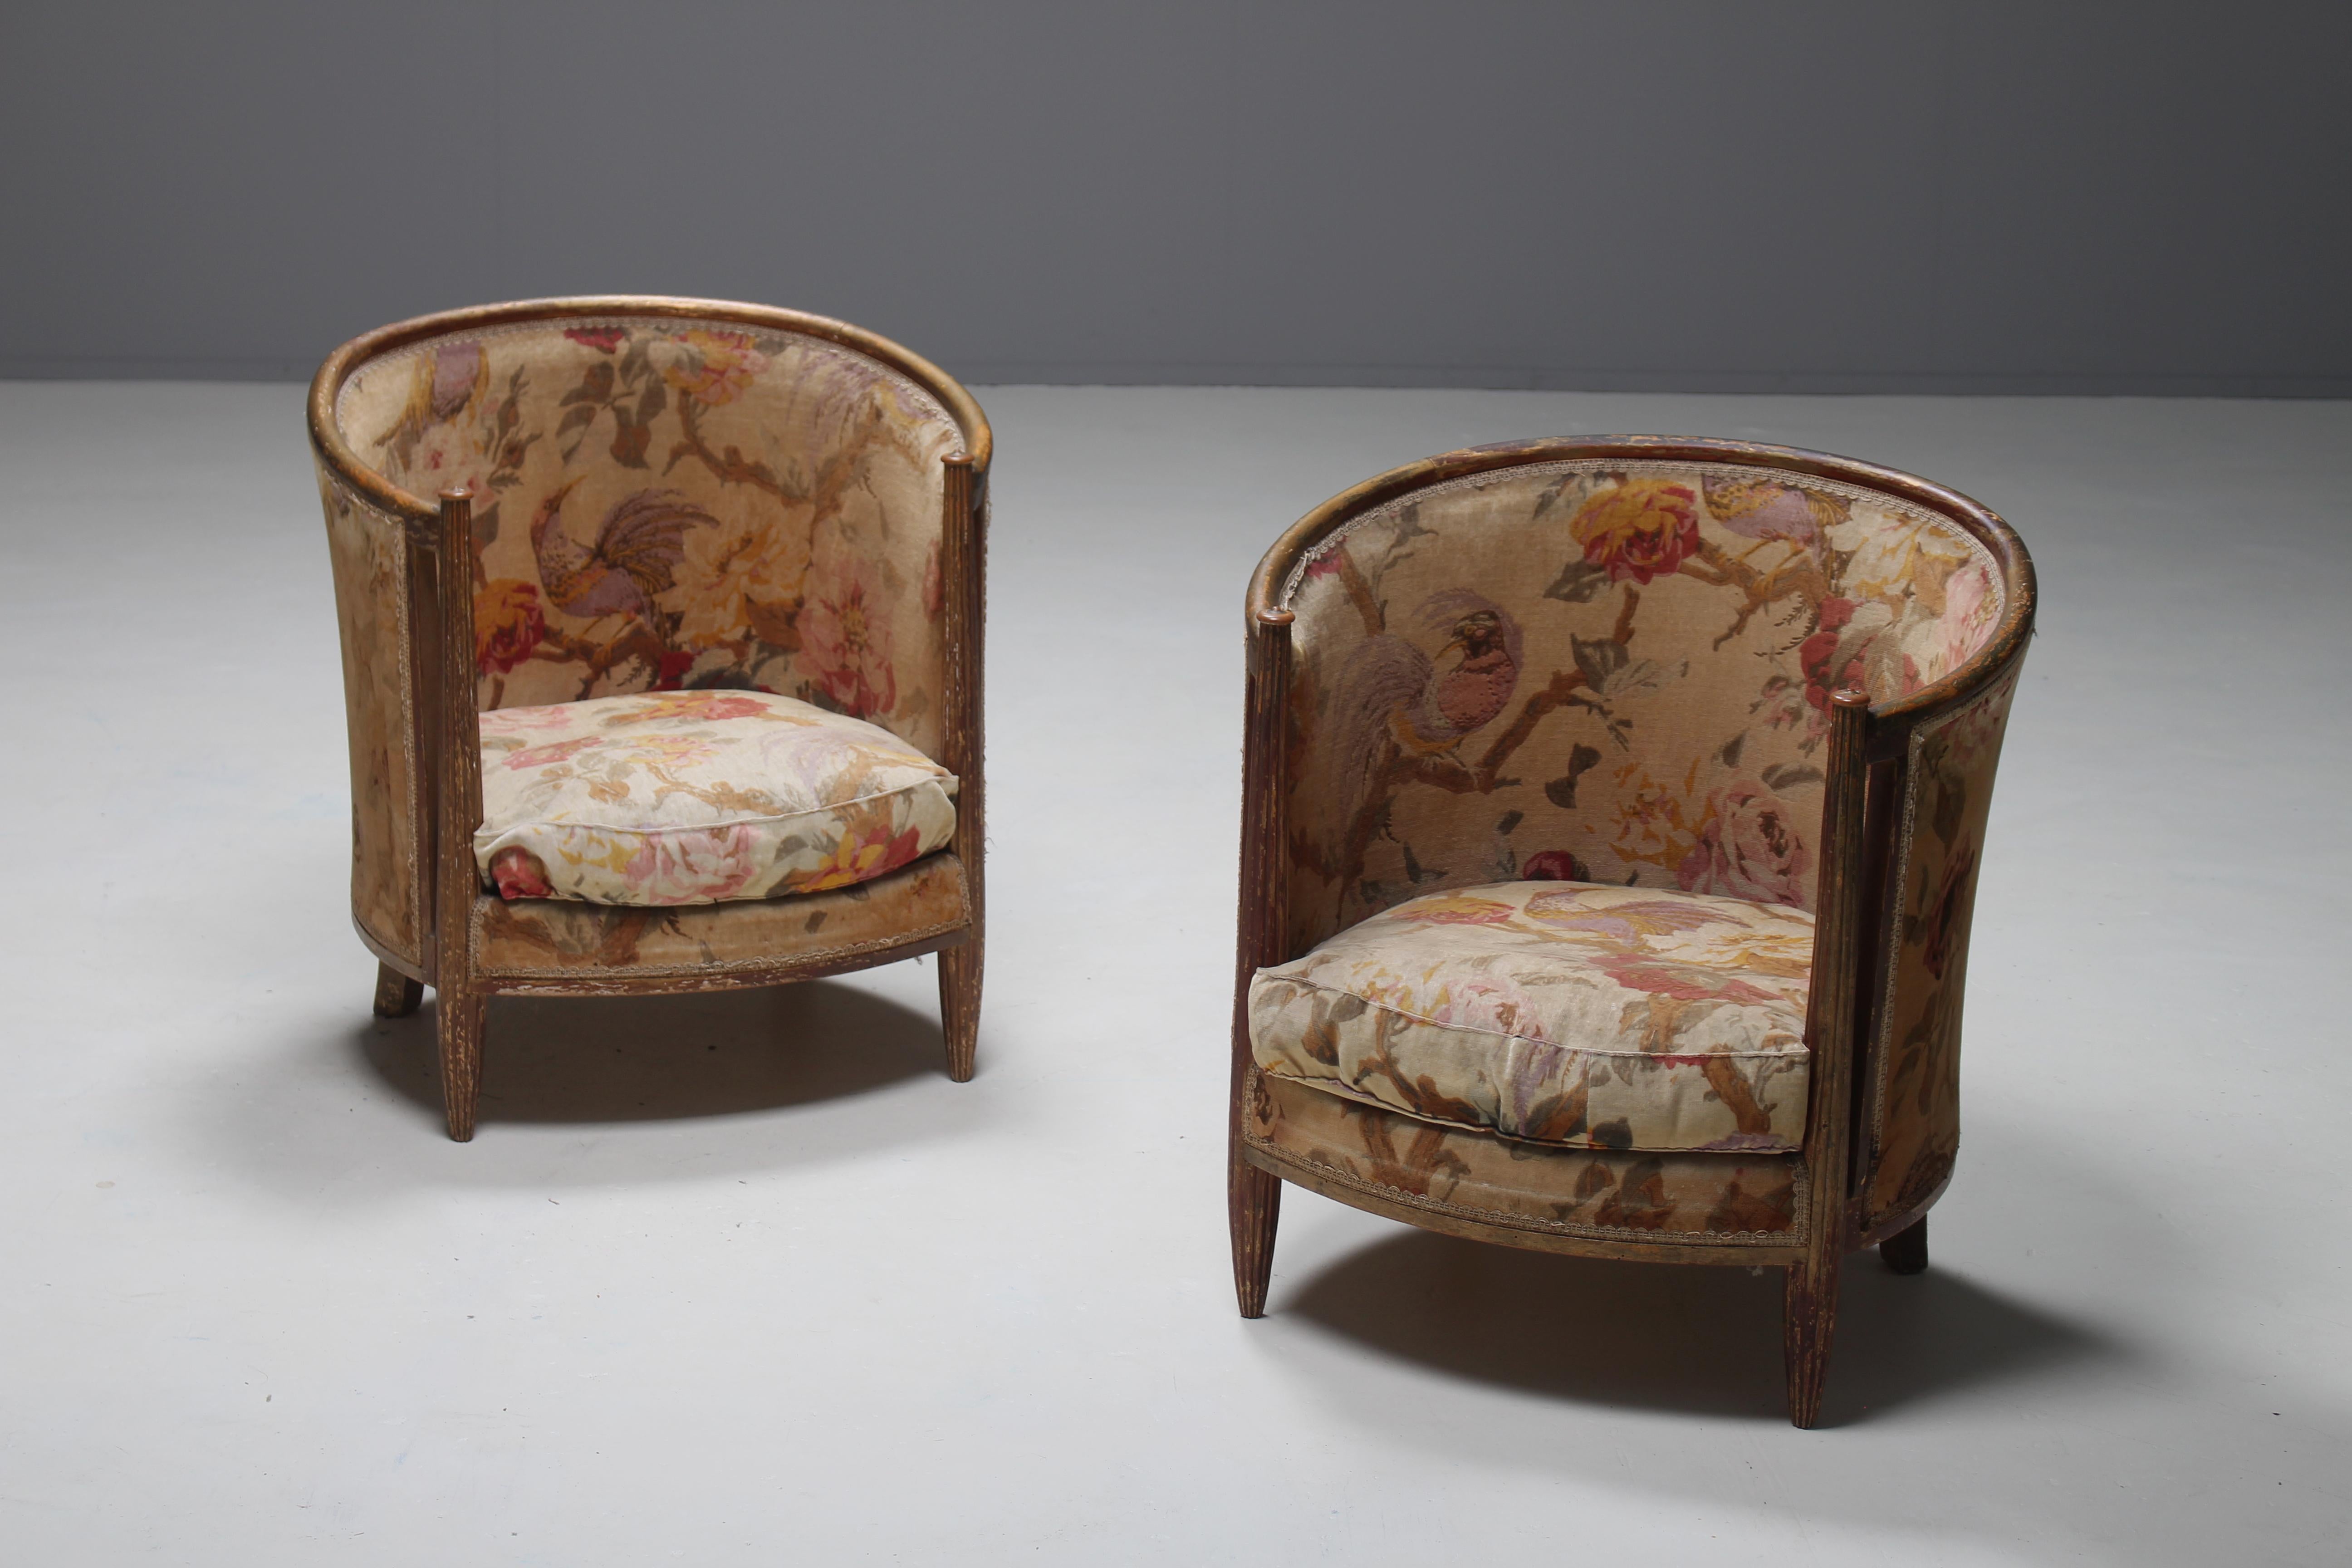 Important Early and Rare Gilded Paul Follot Art Nouveau Club Chairs, 1911 For Sale 3